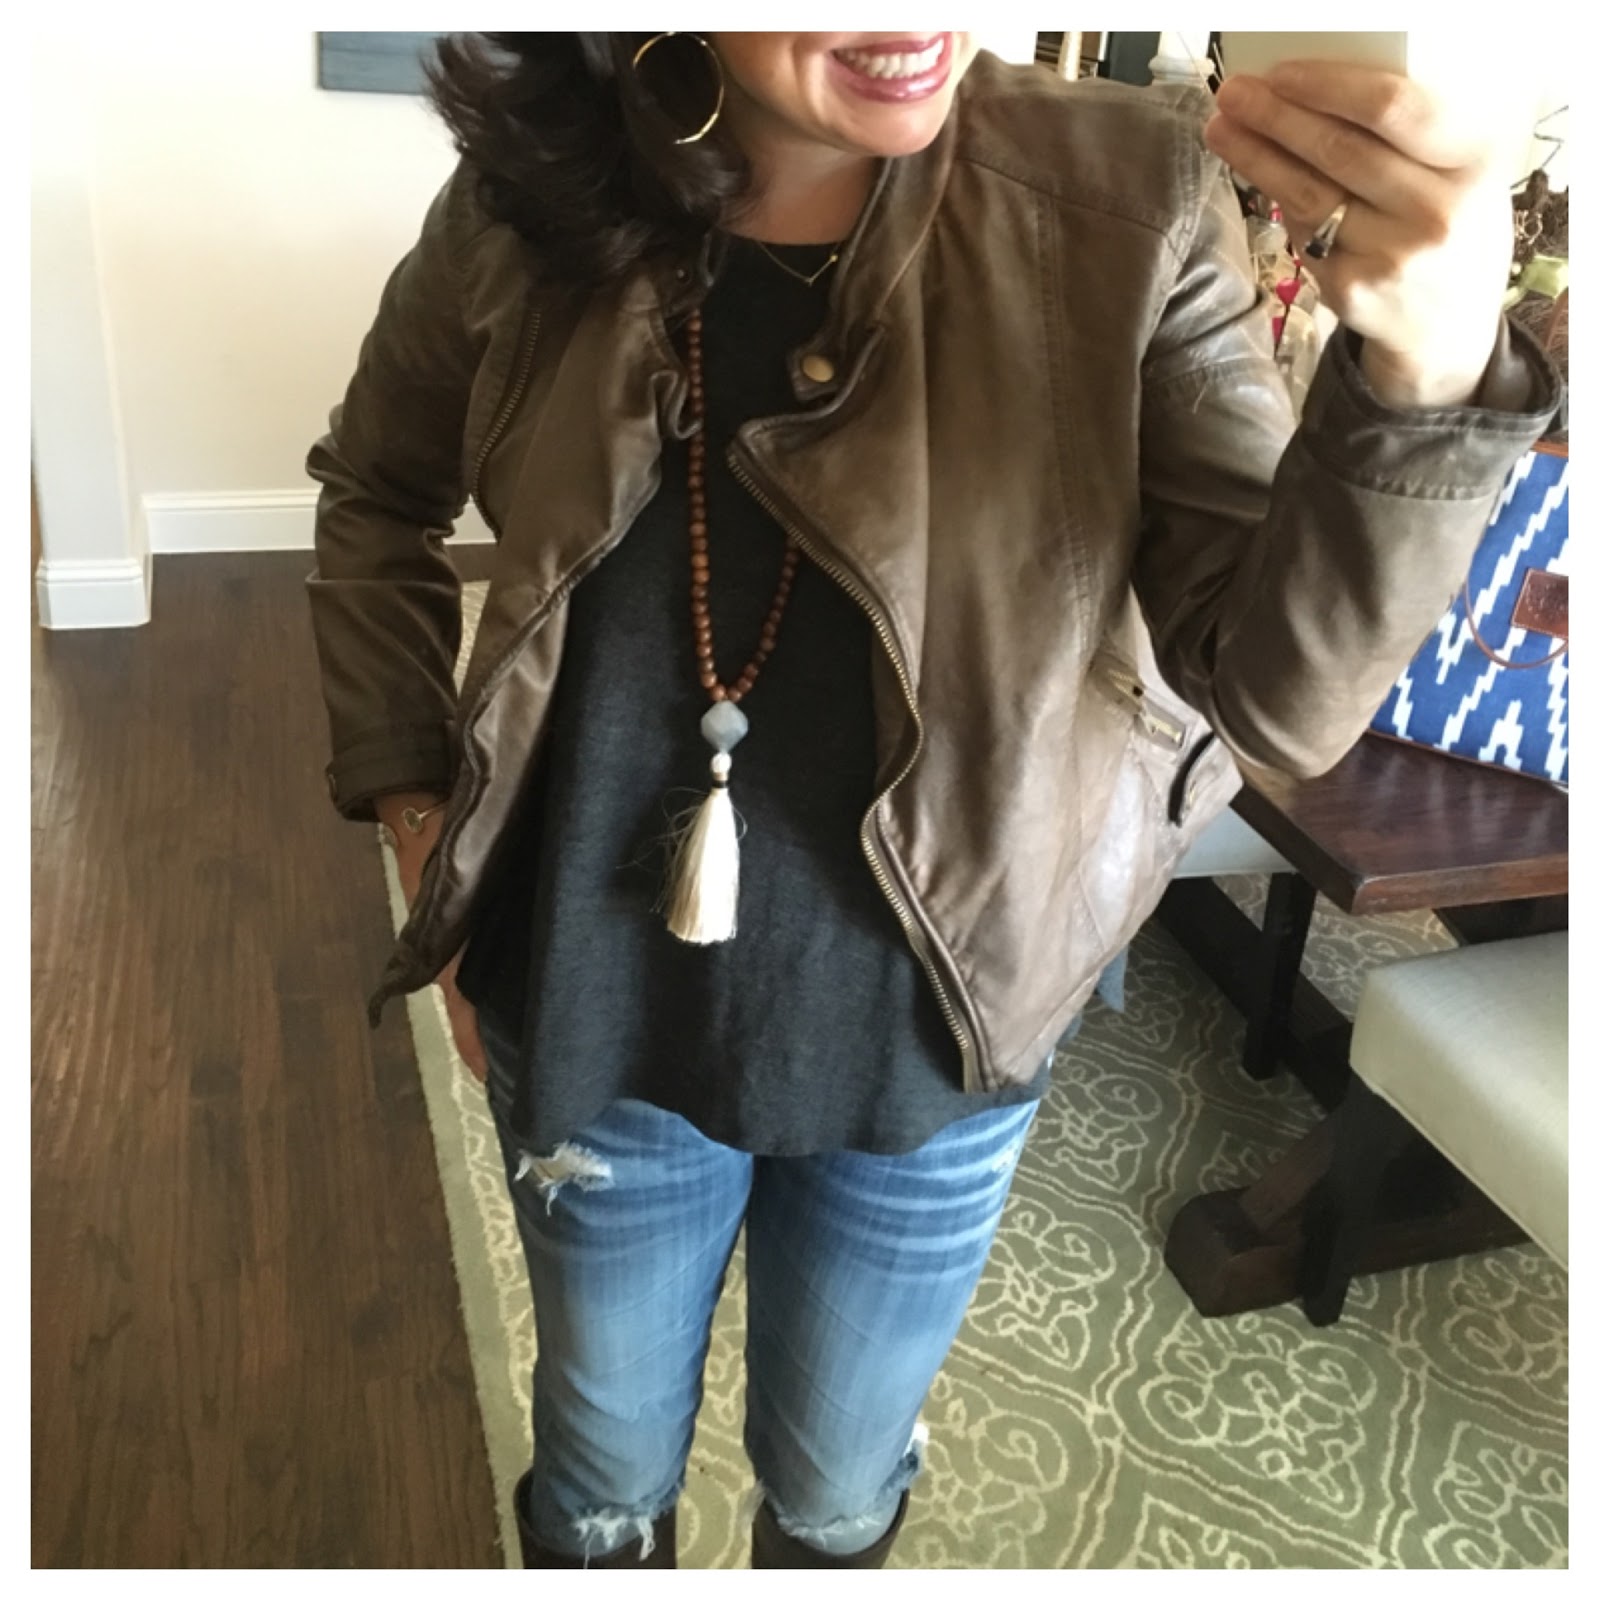 Joanna Gaines Told Me To: Outfit #1 — Sheaffer Told Me To